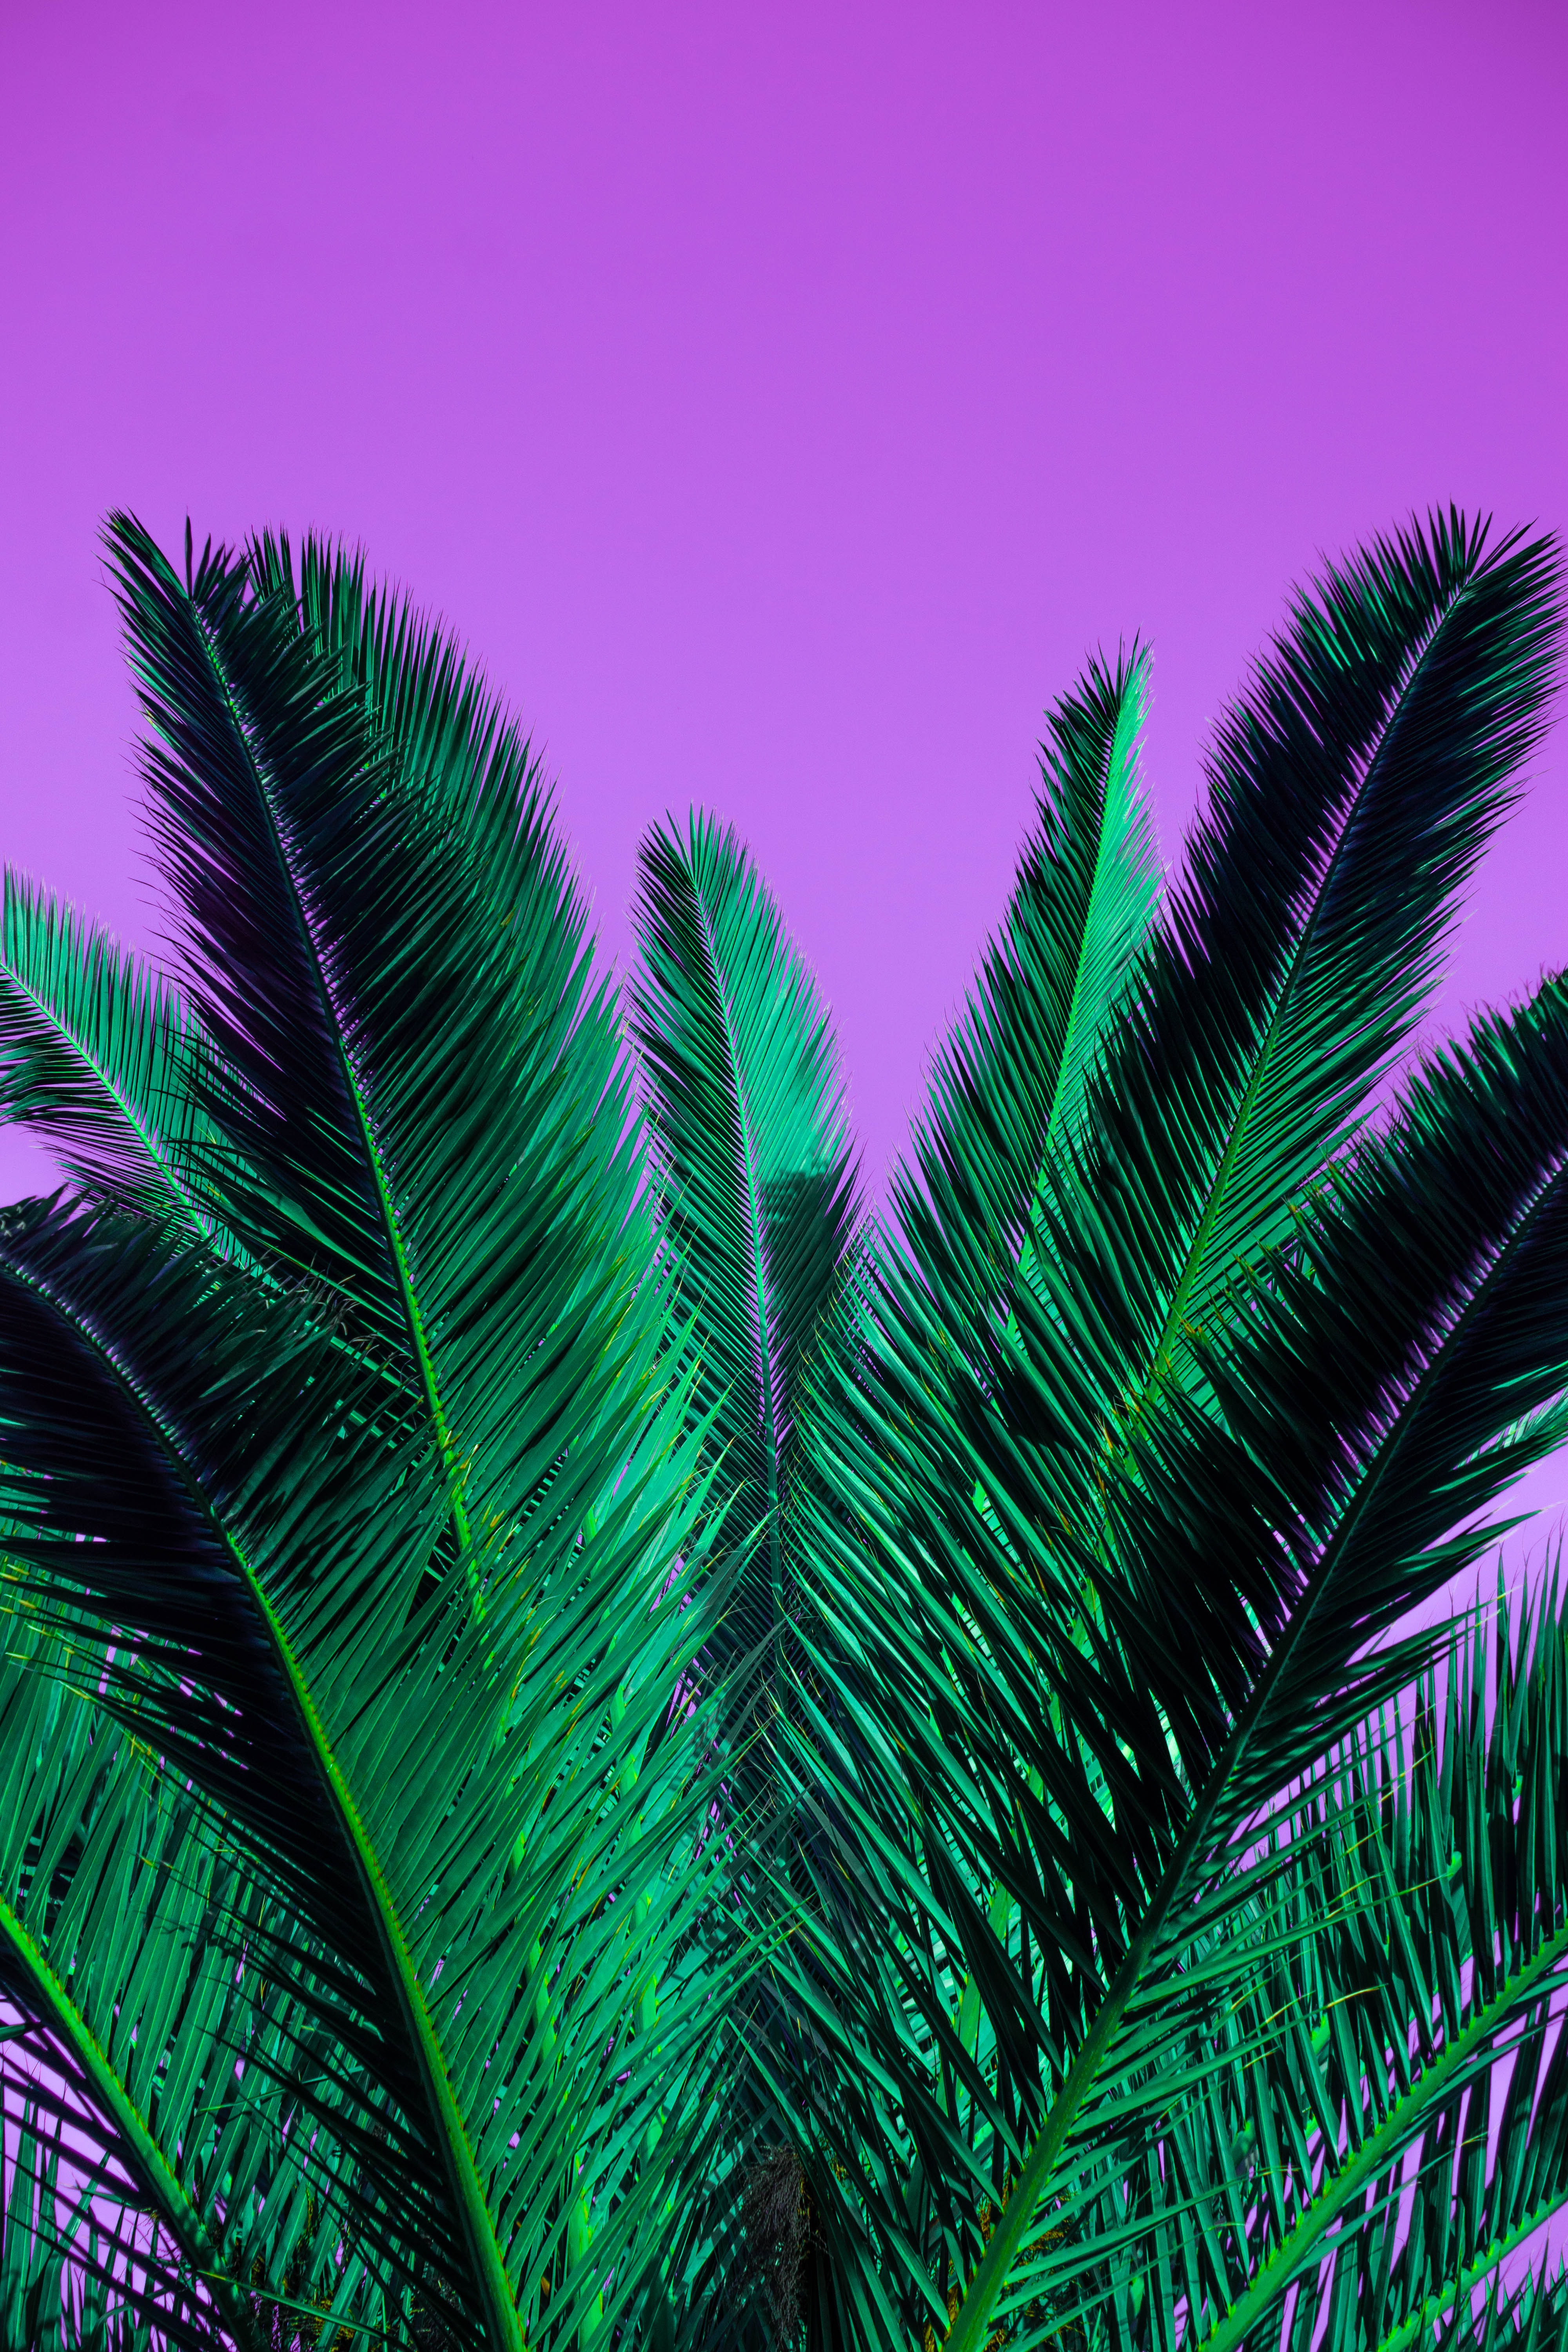 126266 download wallpaper violet, nature, leaves, plant, palm, branches, branch, purple screensavers and pictures for free